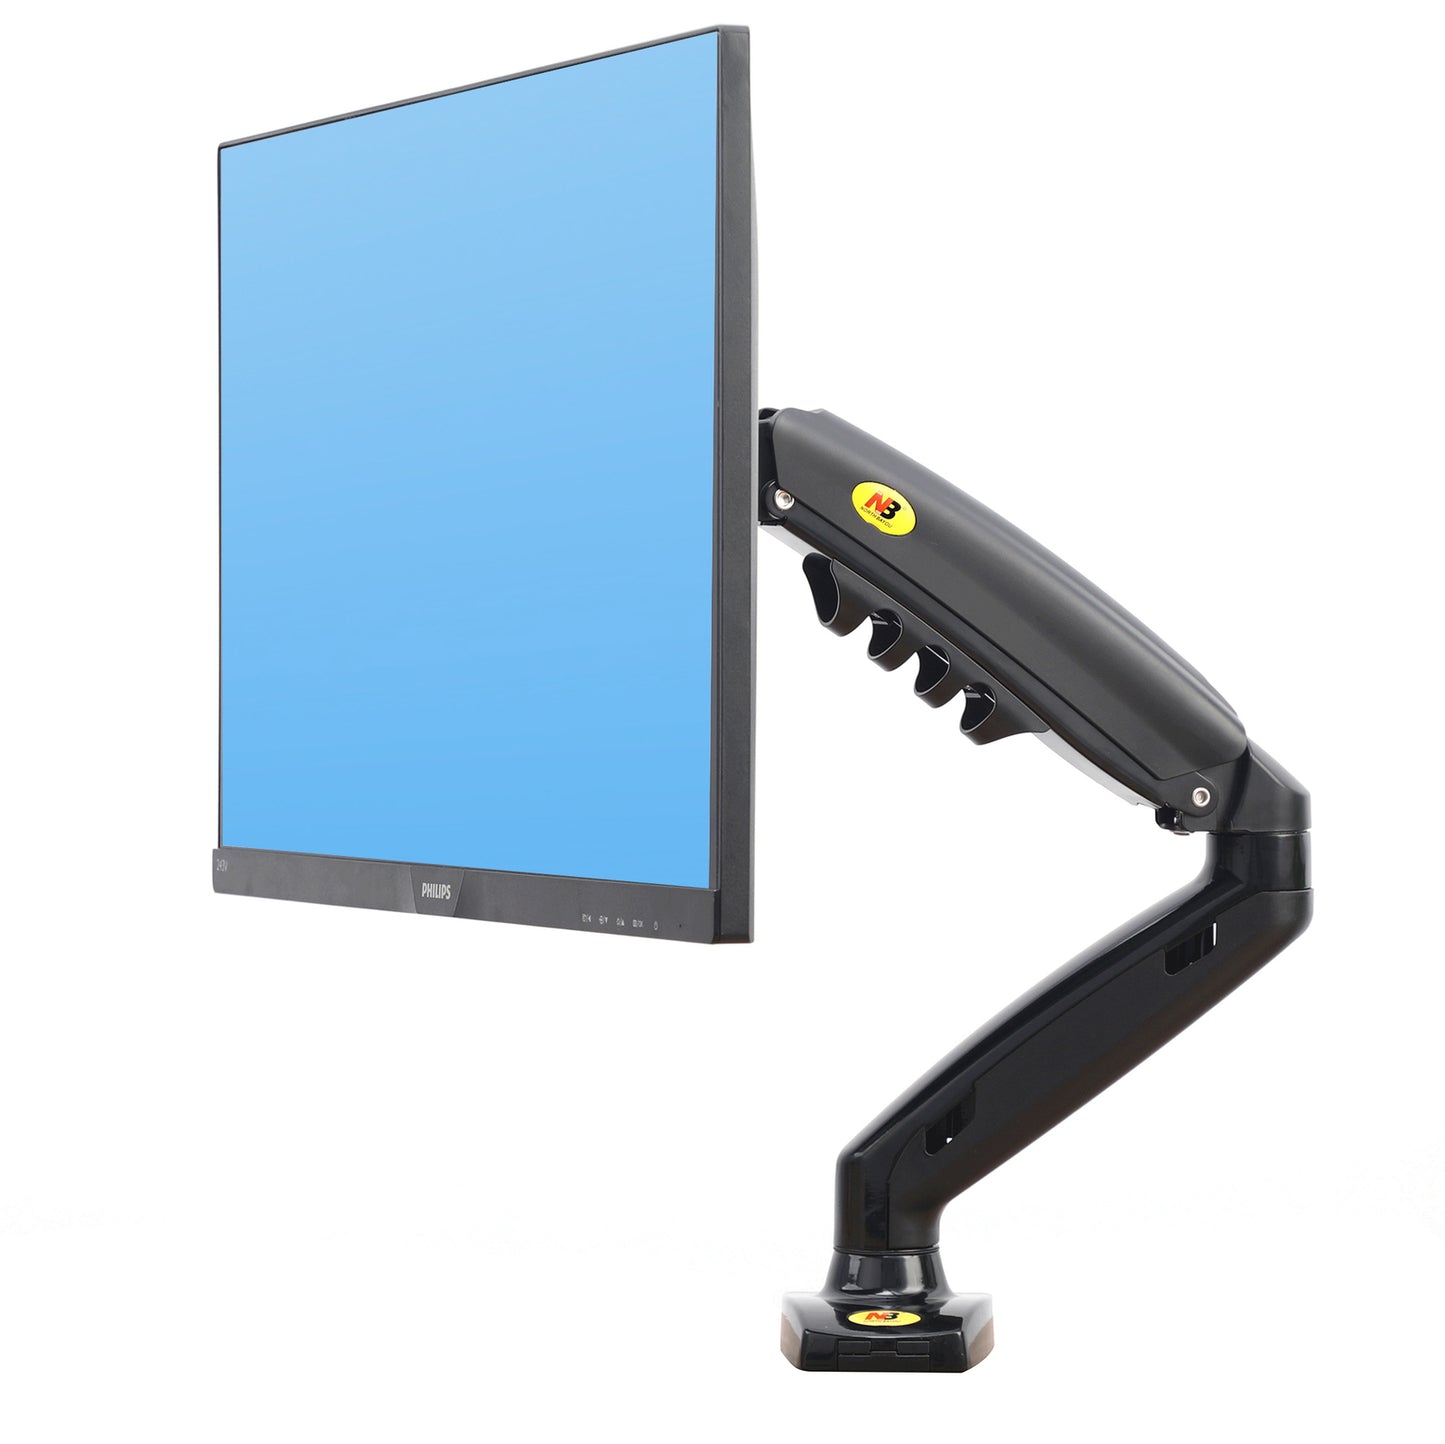 NB North Bayou F80 17"- 30" with 9Kg Max Payload Heavy Duty VESA Monitor Desk Mount Stand and Gas Strut Full Motion Swivel Computer Arm for LCD LED TV Television